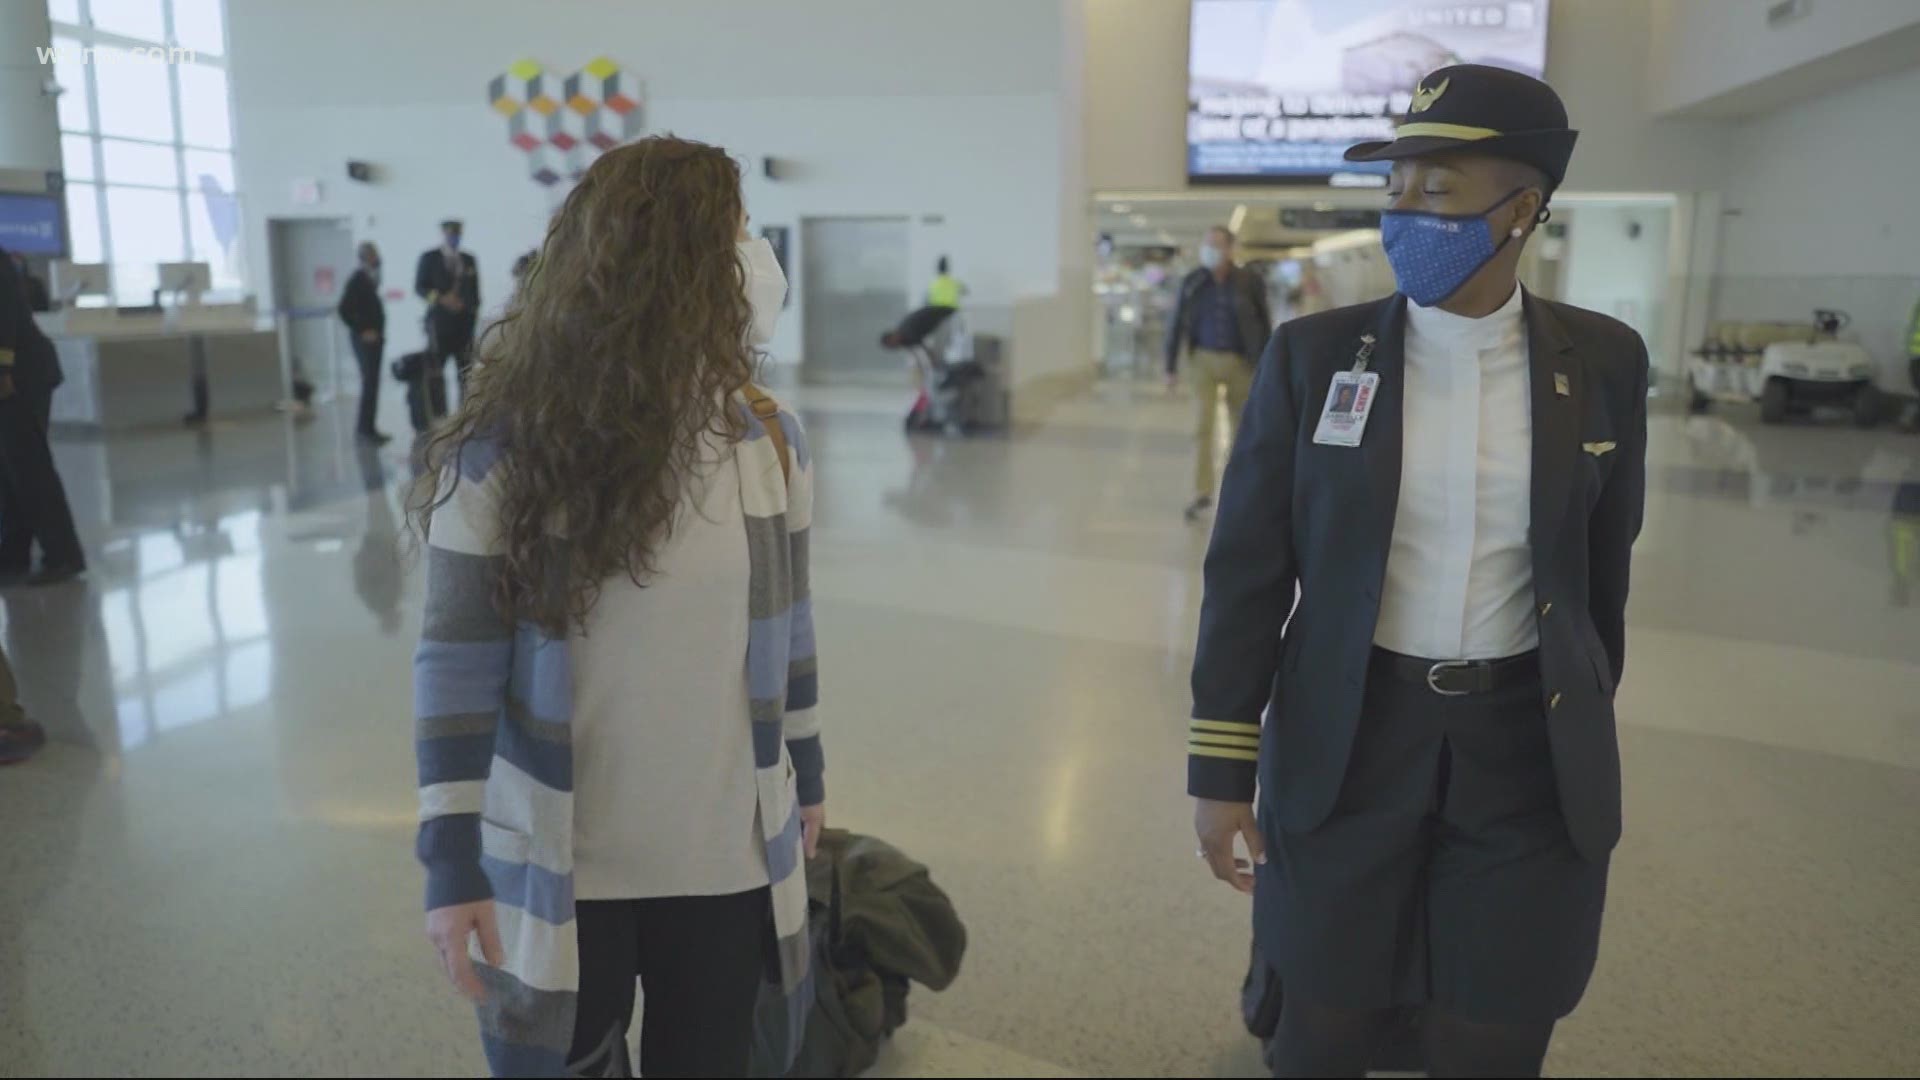 Michelle Boudin learns how one airline is trying to get more women and people of color flying as pilots.